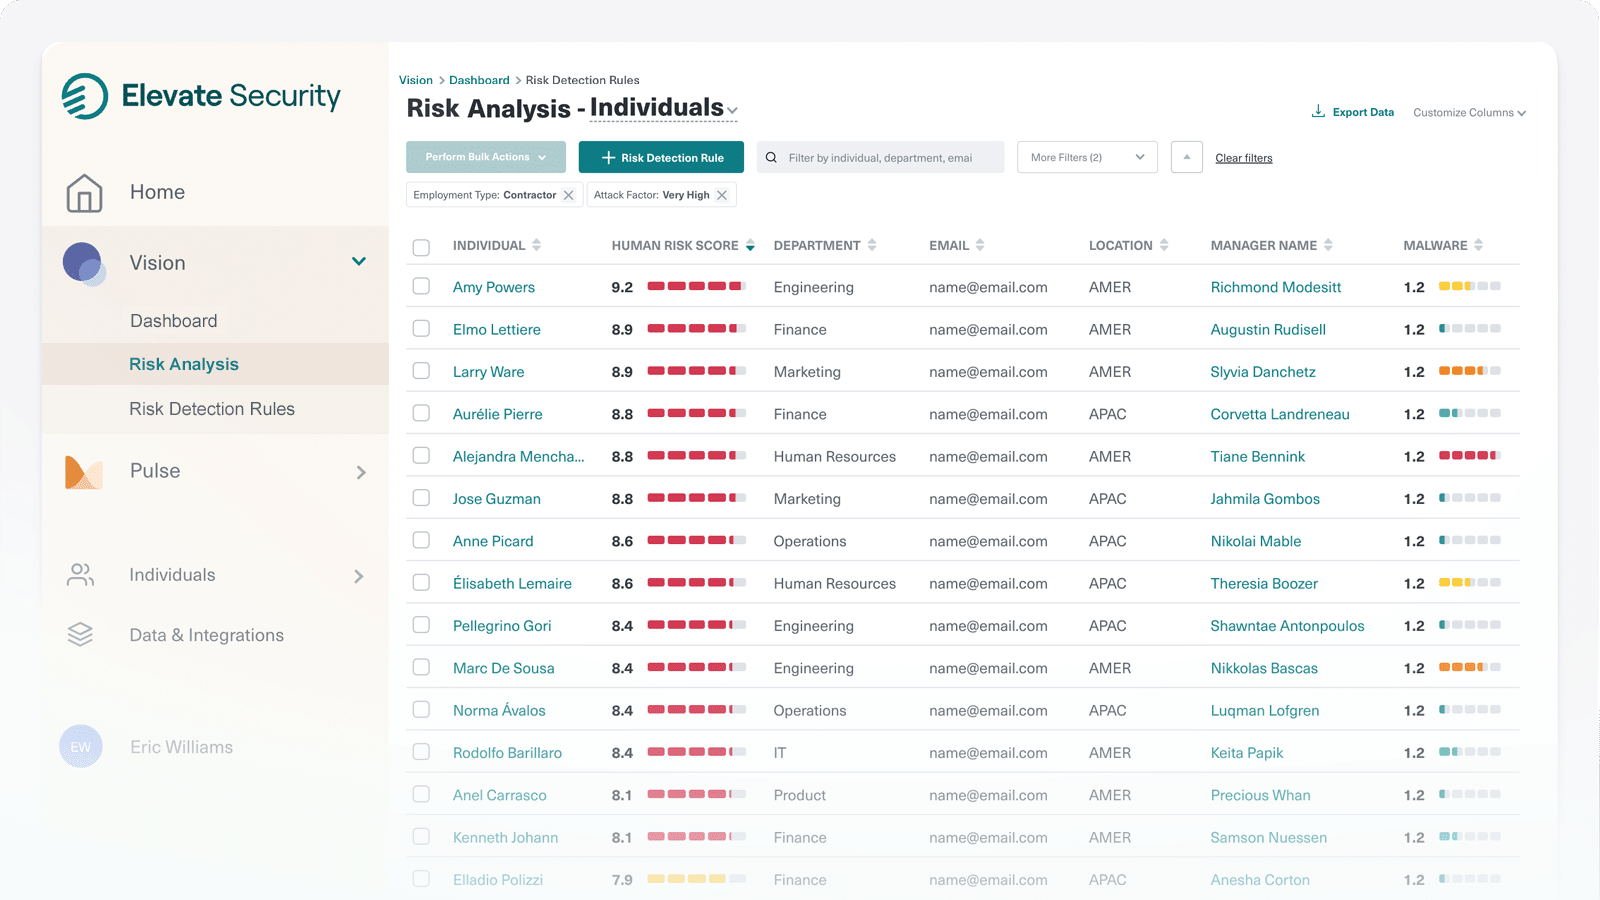 Elevate Security dashboard screenshot showing a risk analysis of individuals